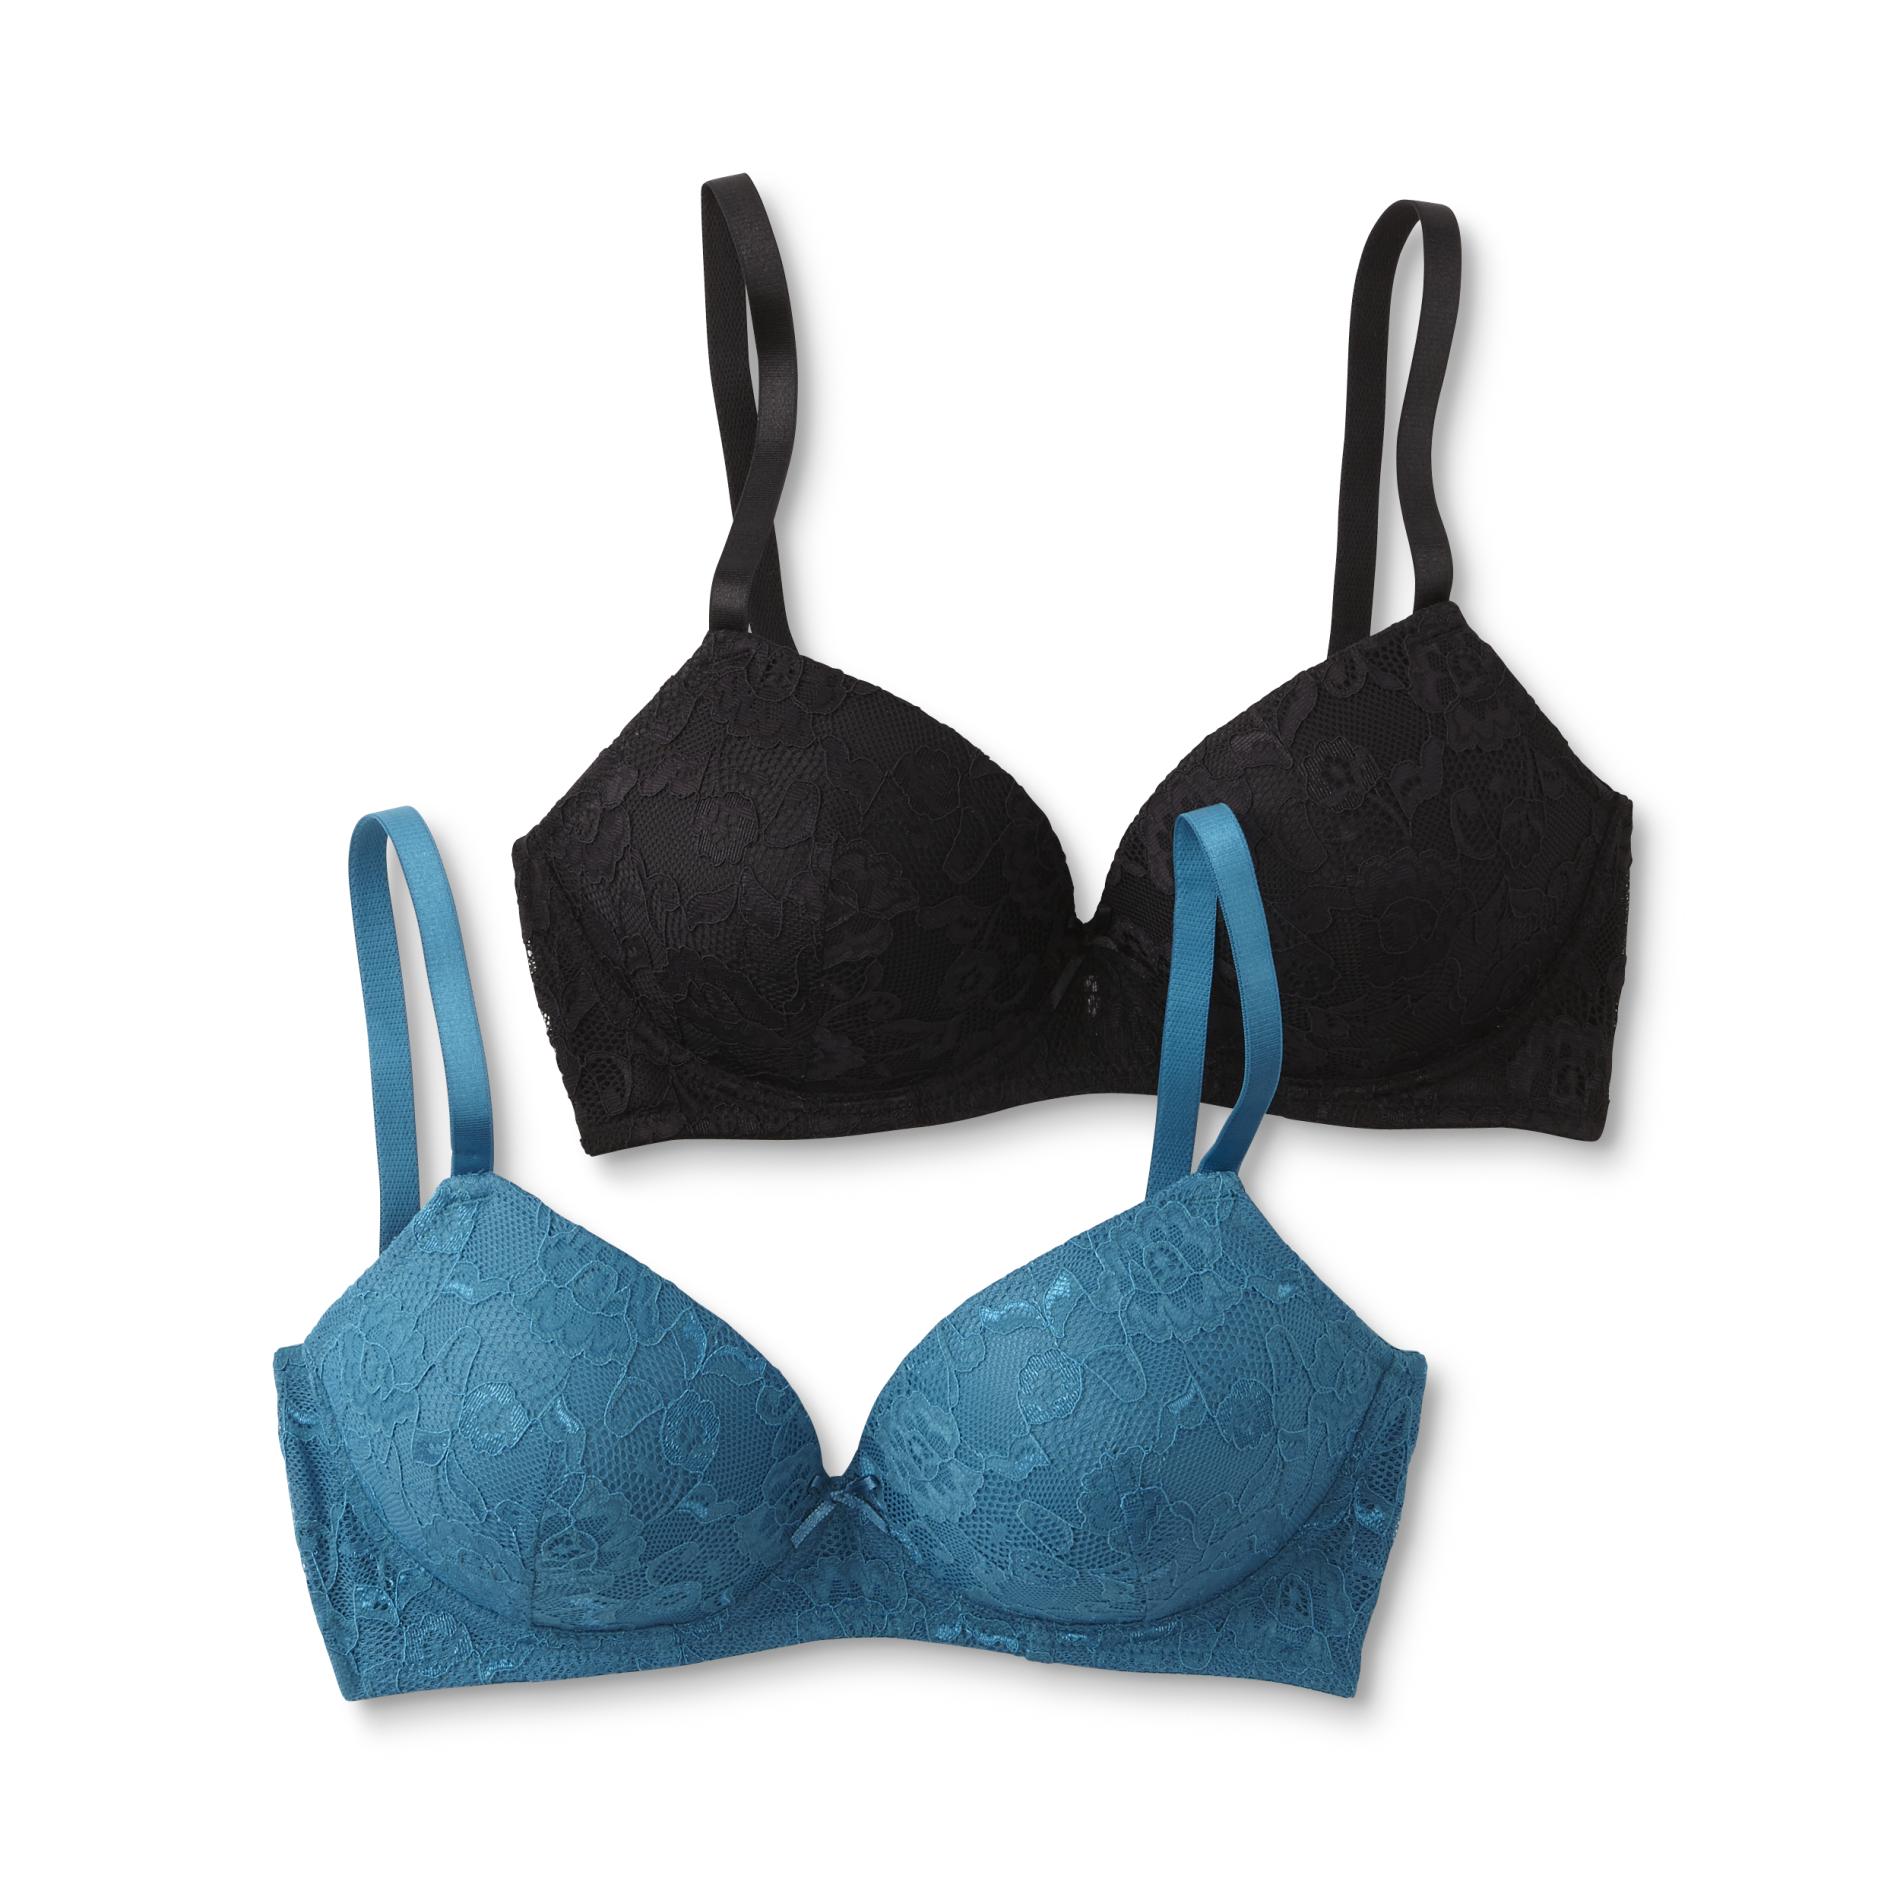 Simply Styled Women's 2-Pack Lace Wire-Free Bras - Sears